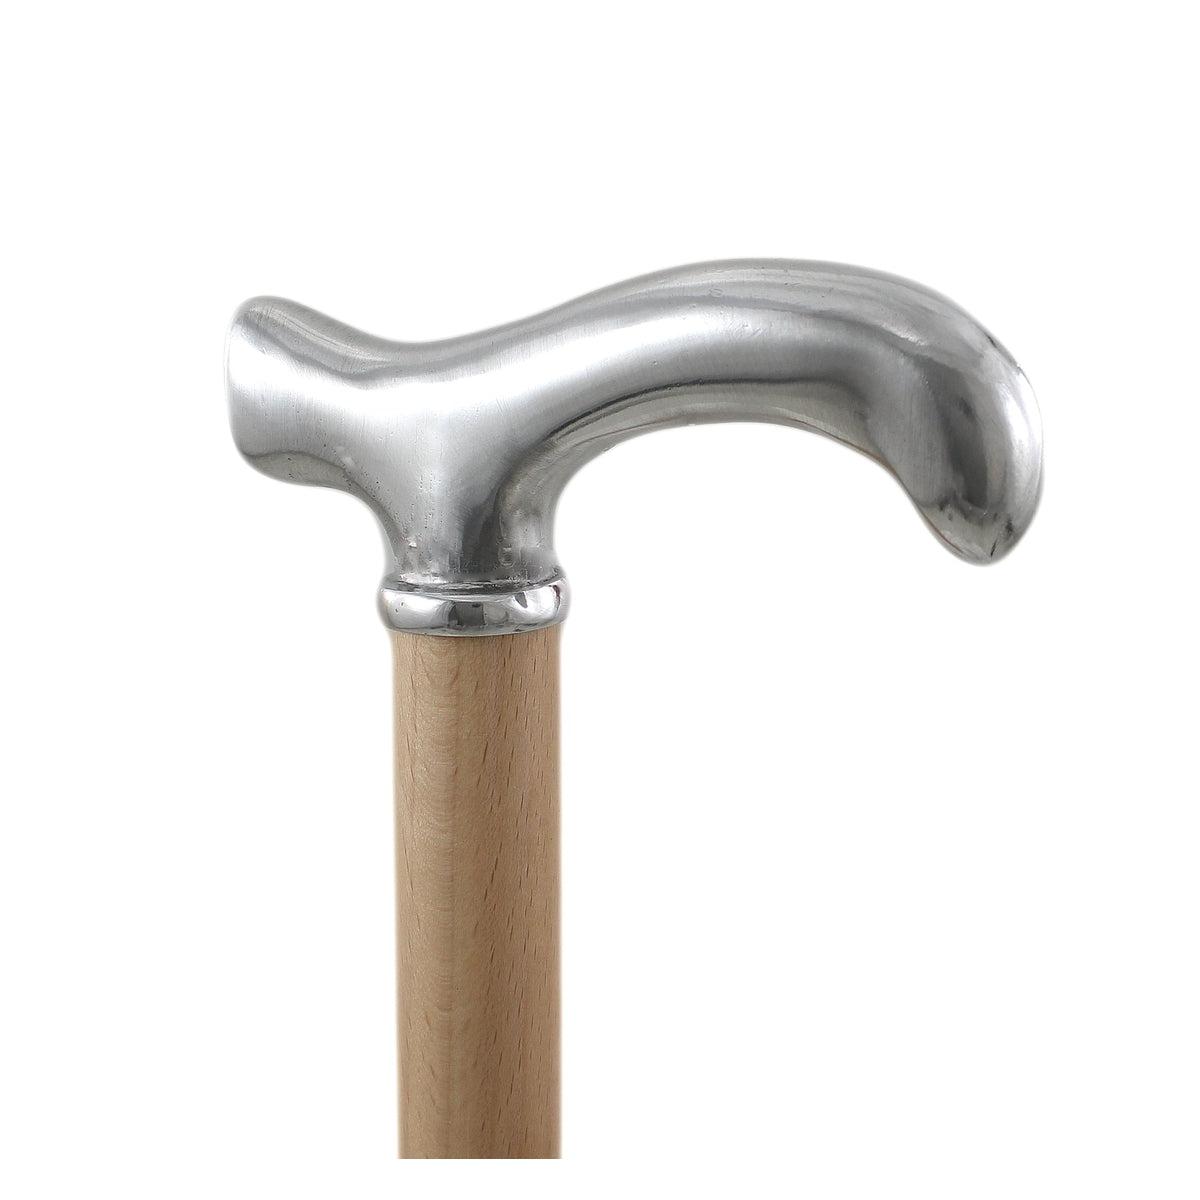 Custom Pure Pewter Derby Handle Classy Cane Or Walking Stick